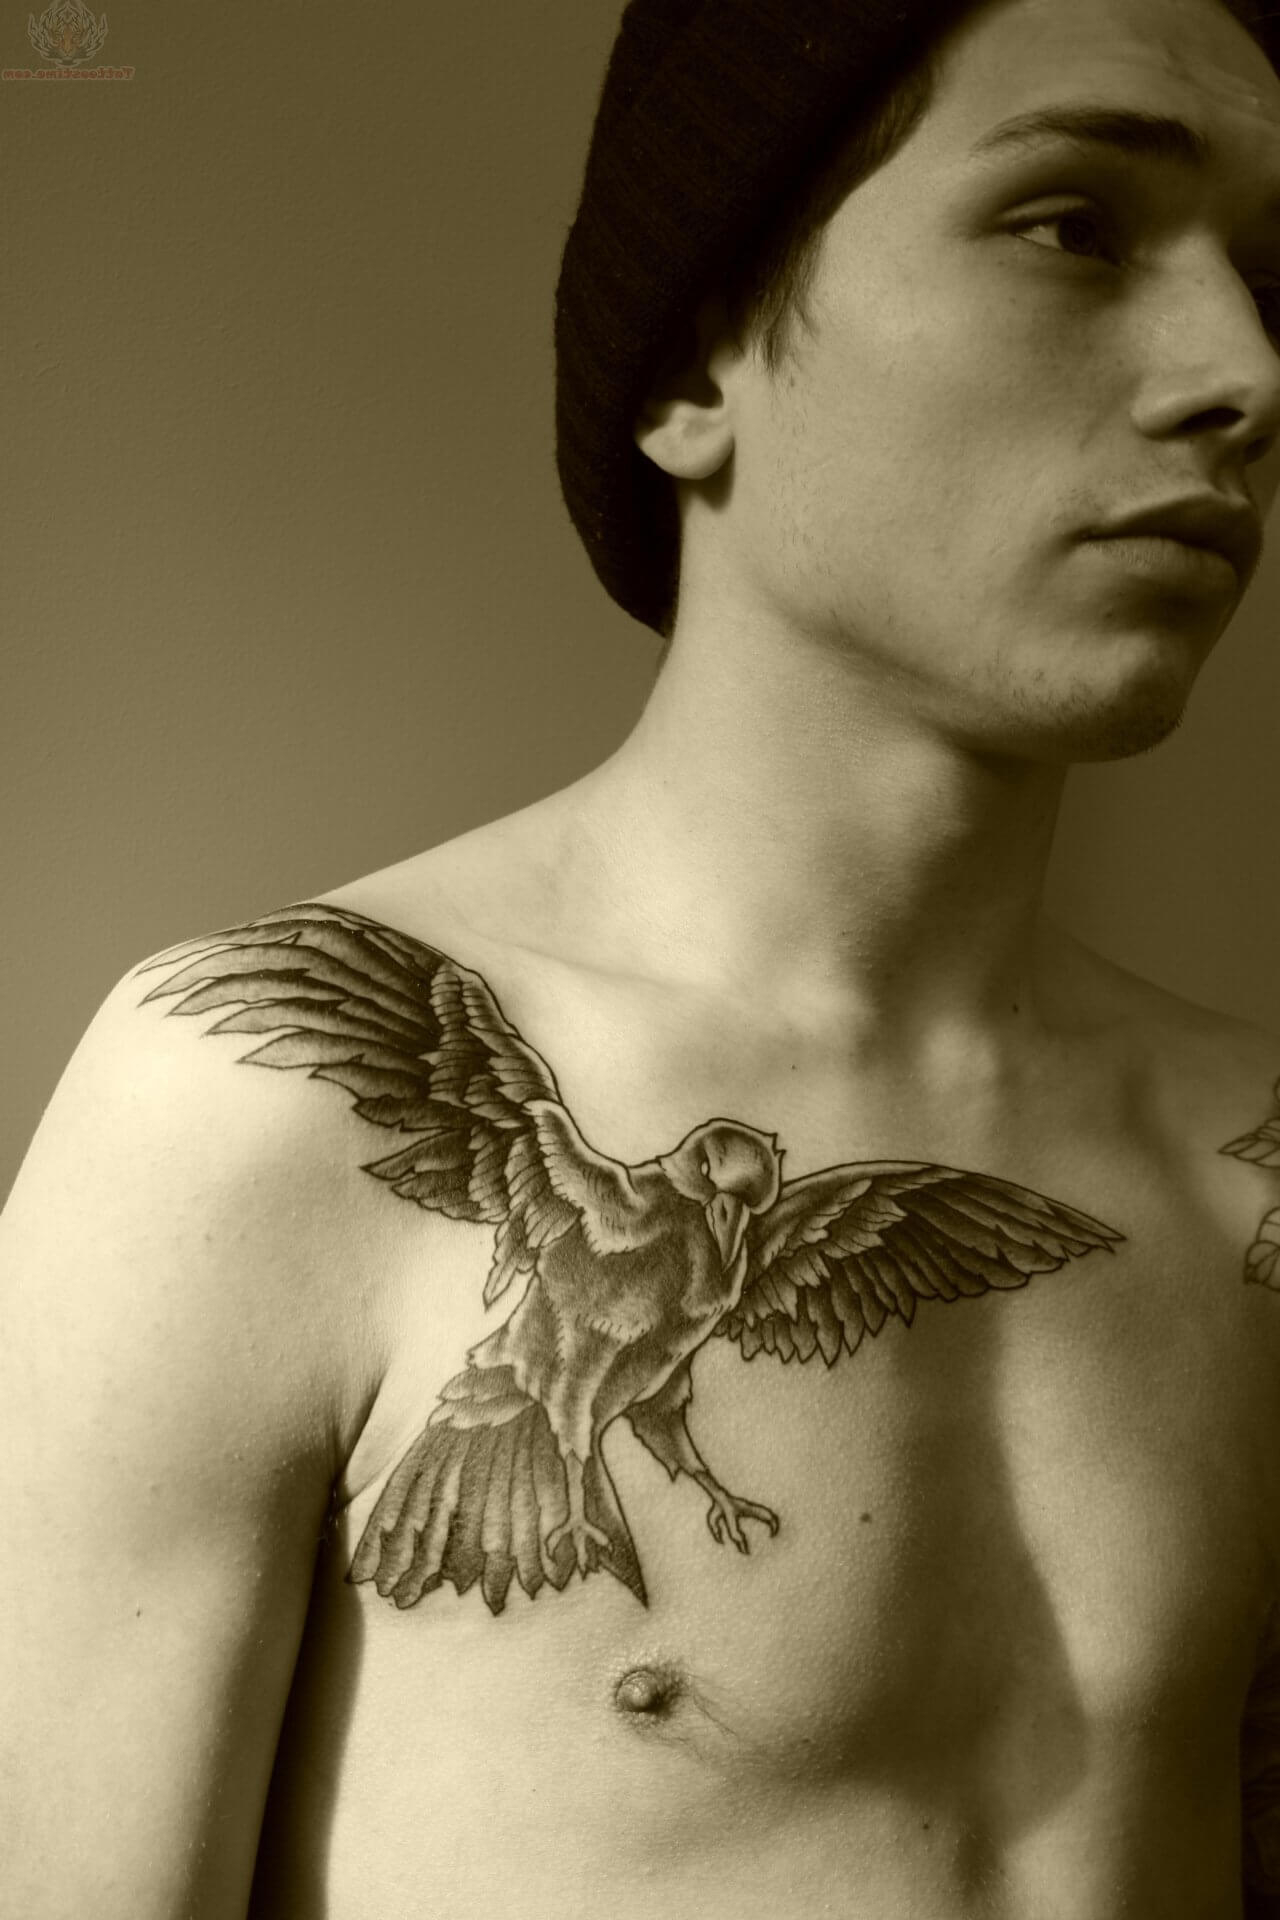 The 100 Best Chest Tattoos For Men Improb inside measurements 1280 X 1920